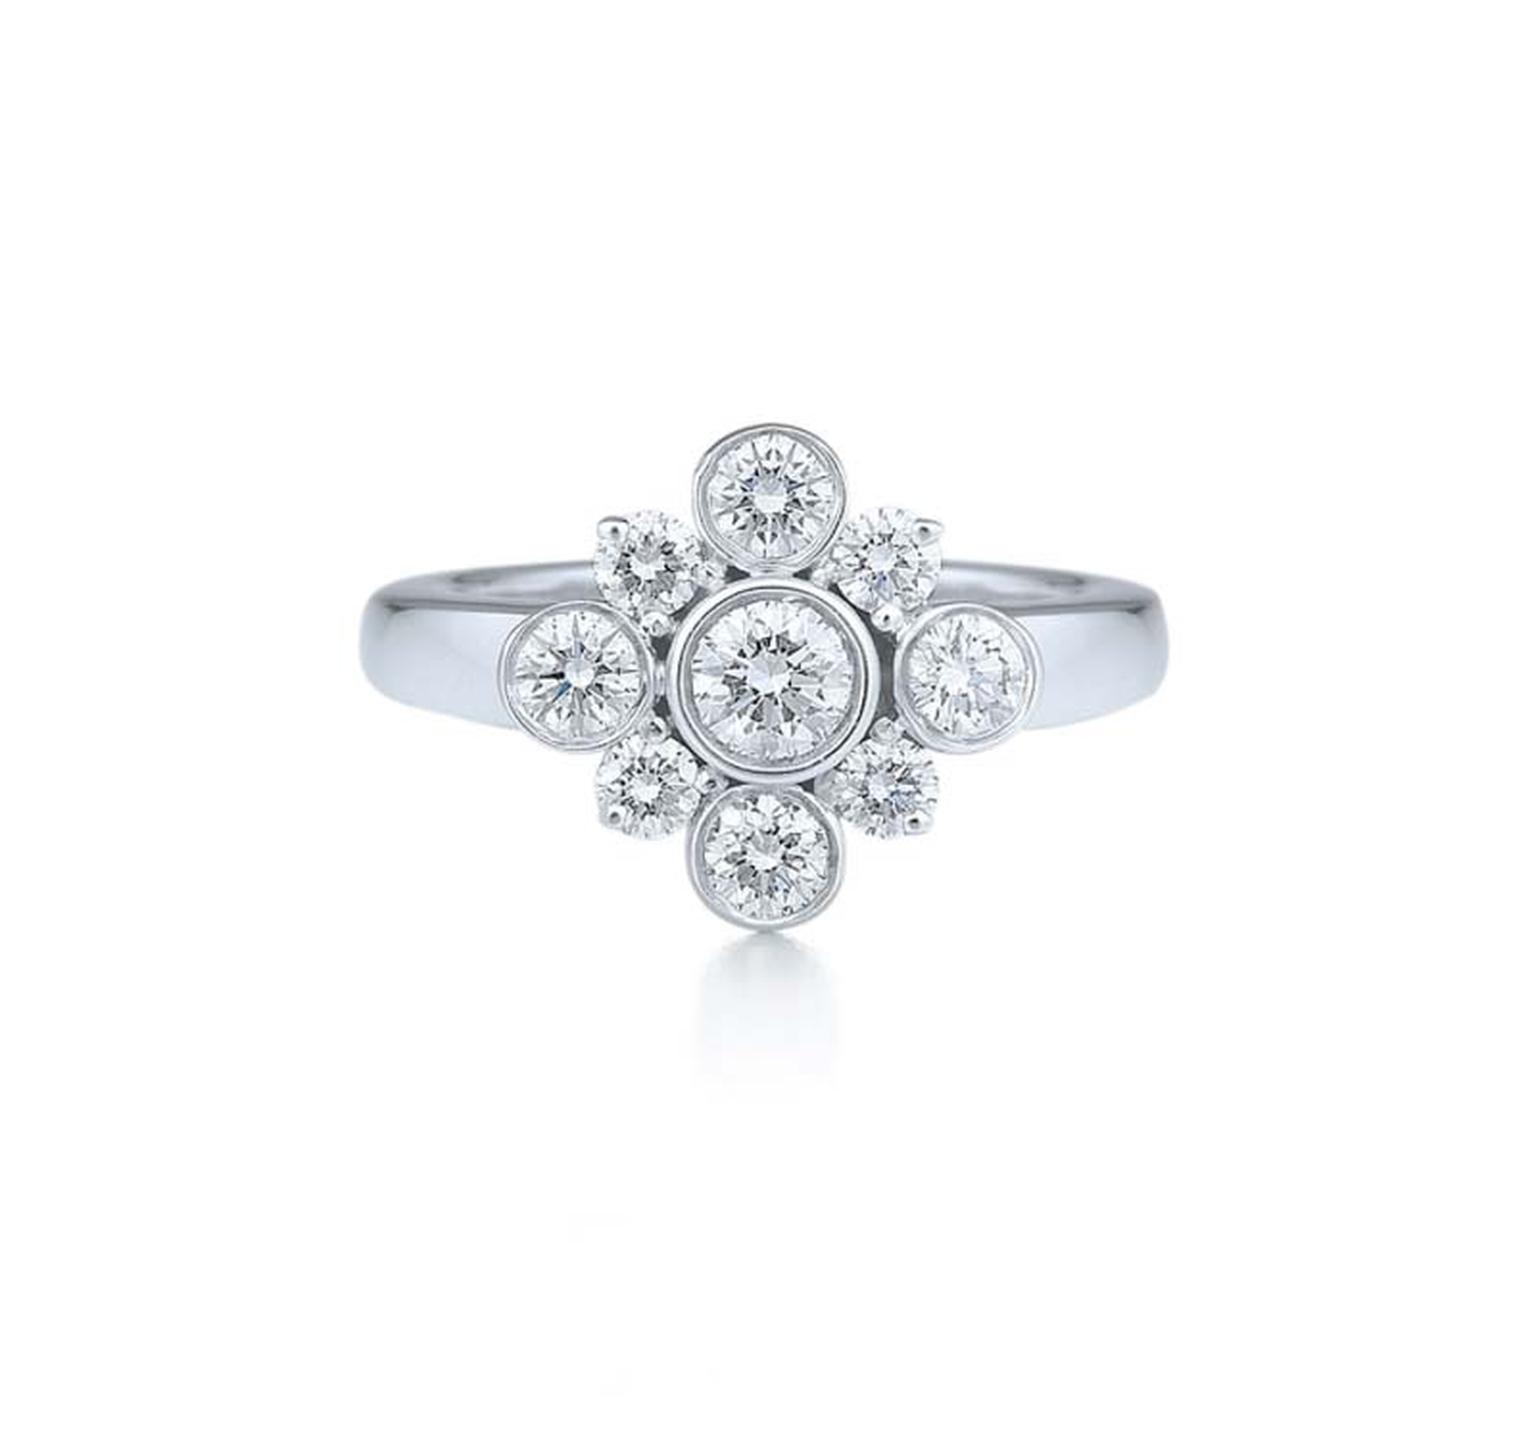 The charming Petal diamond engagement ring from Kwiat in white gold.